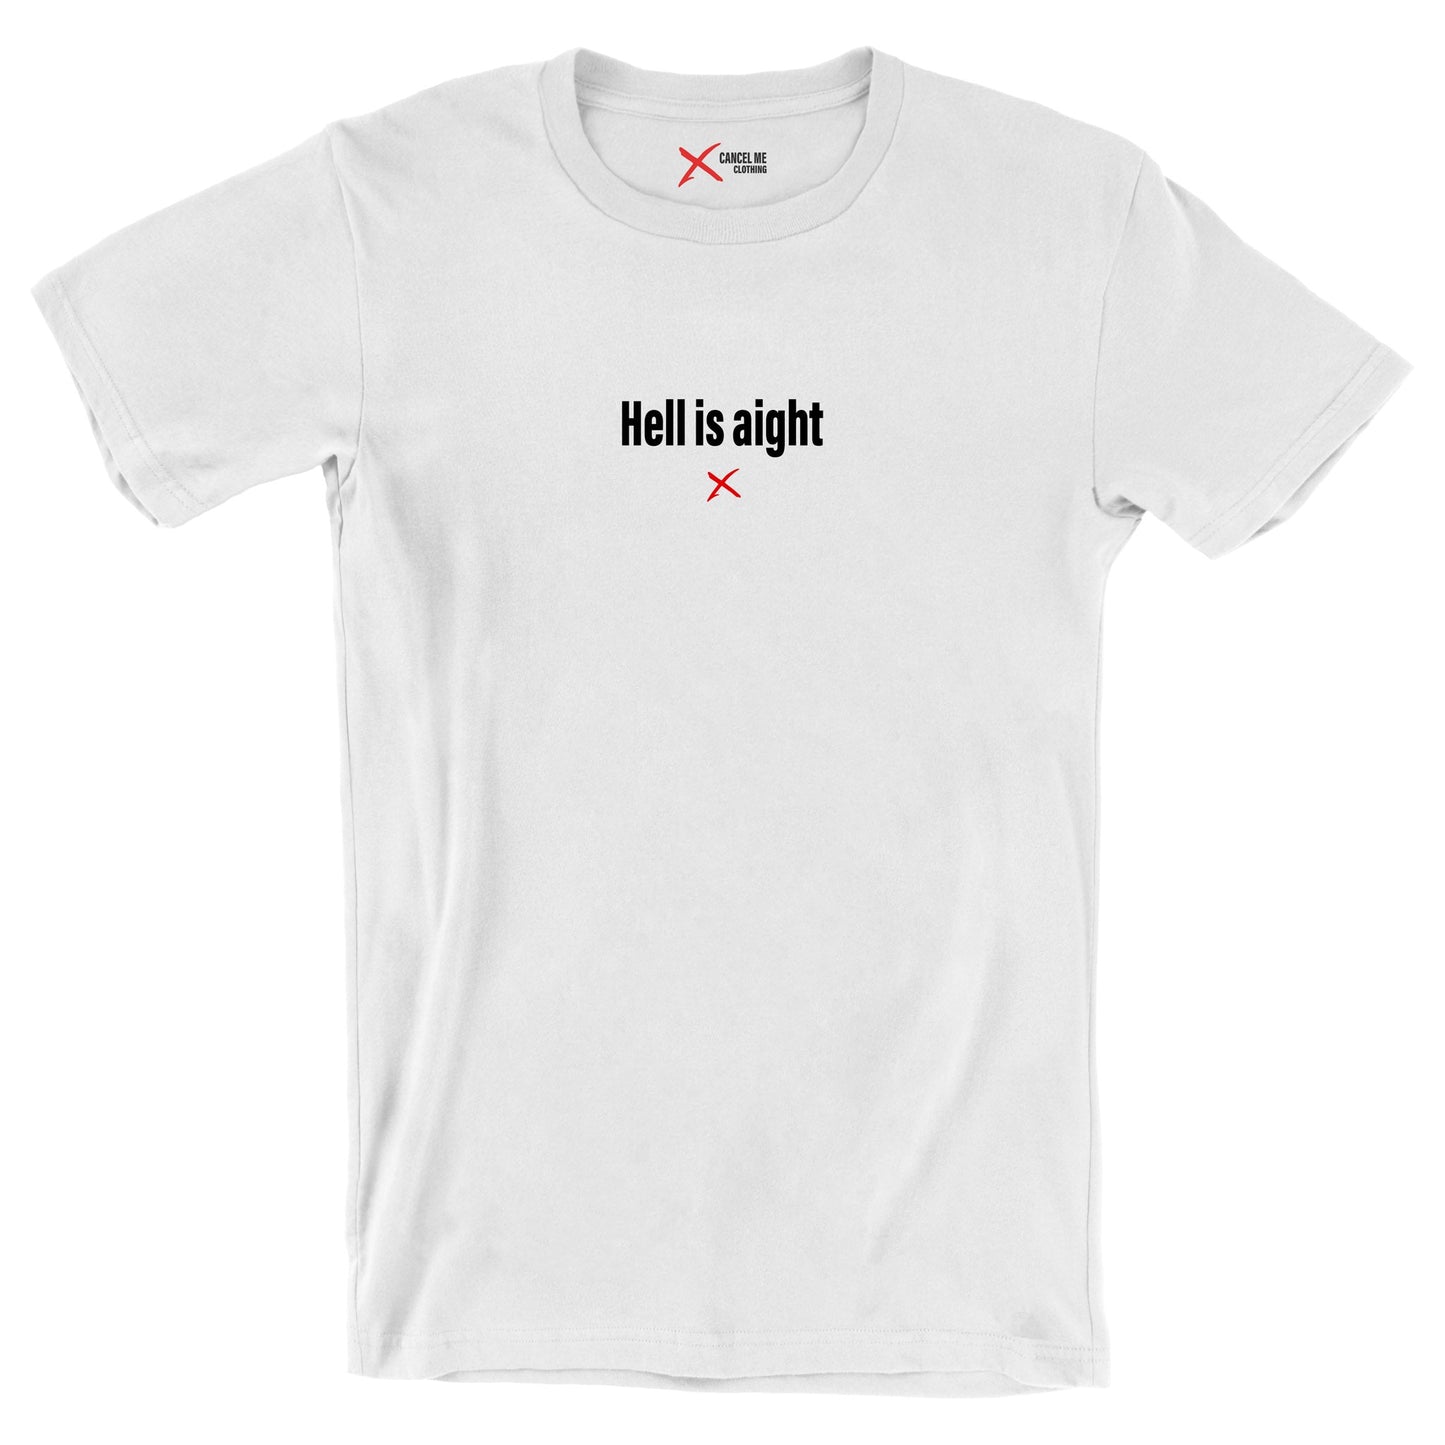 Hell is aight - Shirt